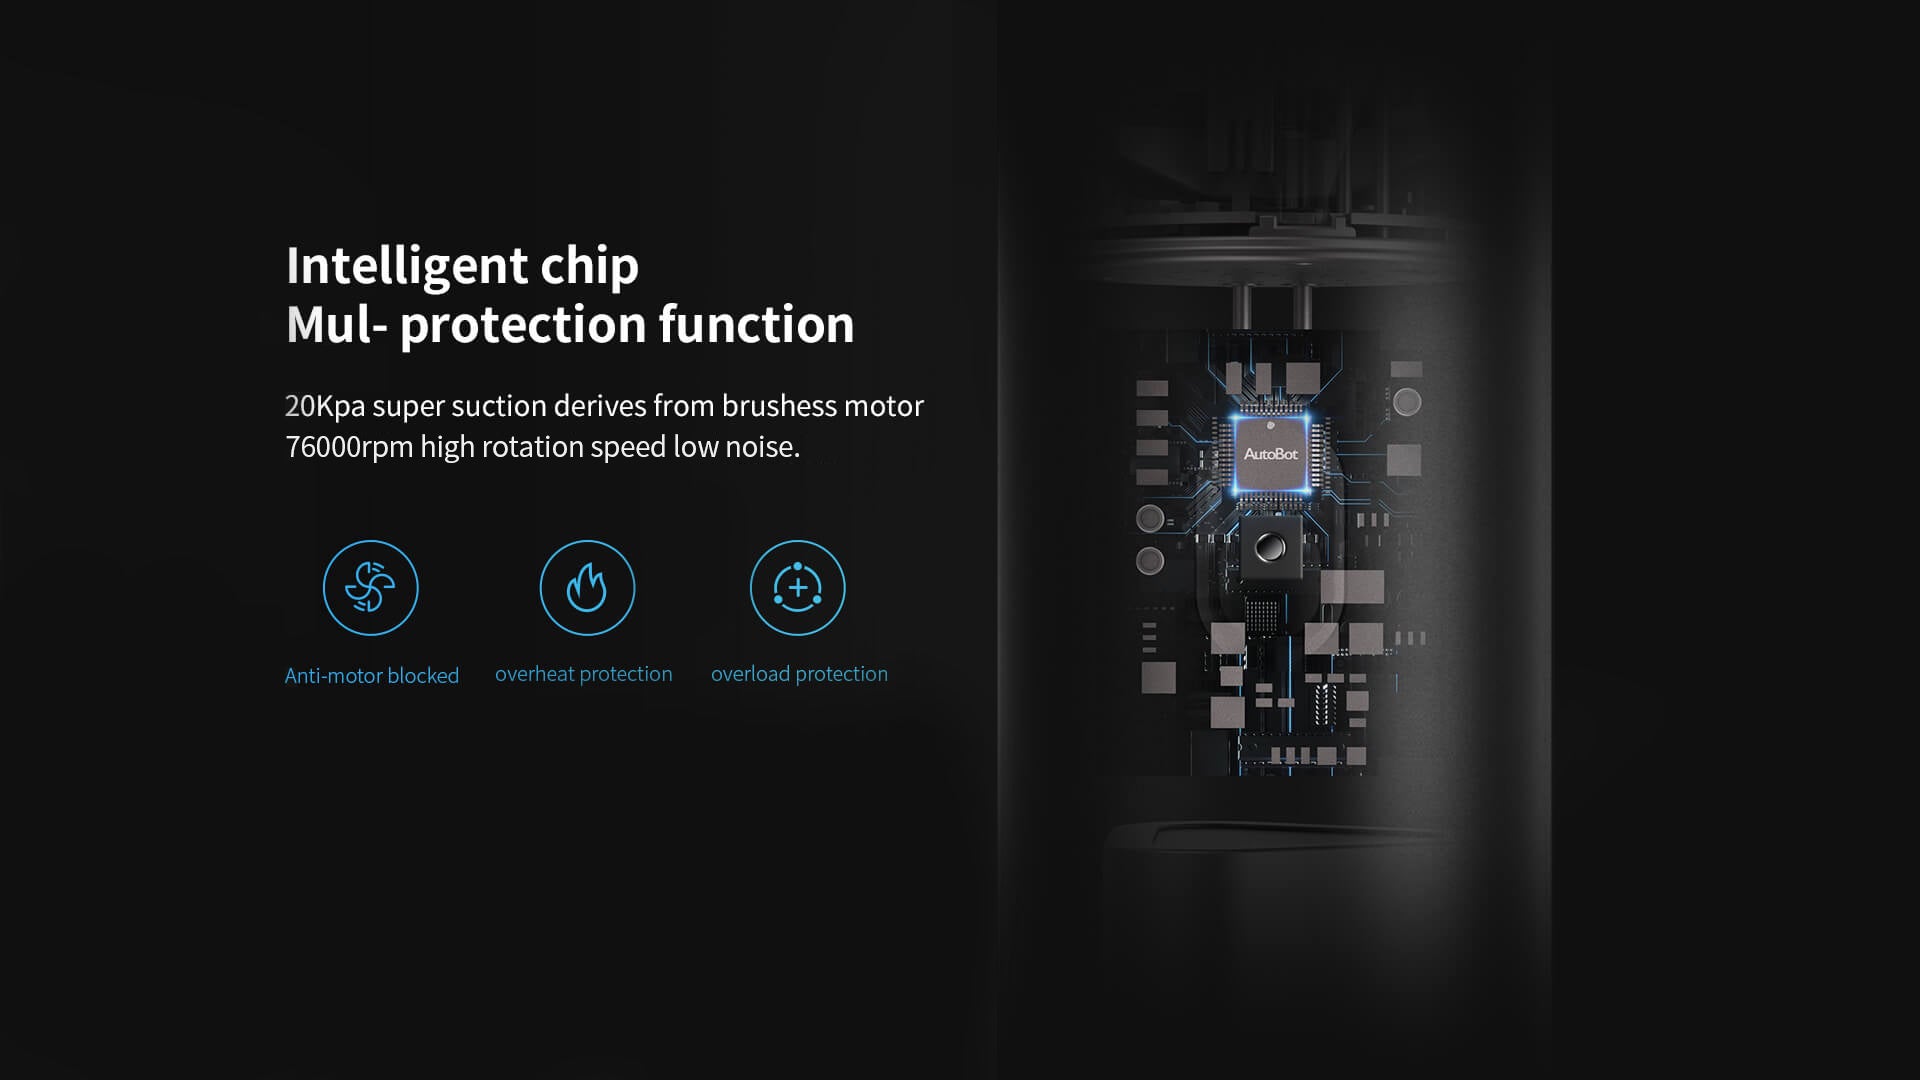 Intelligent chip Mul-protection function 20000pa super suction derives from brushless motor 1000000rpm high rotation speed low noise